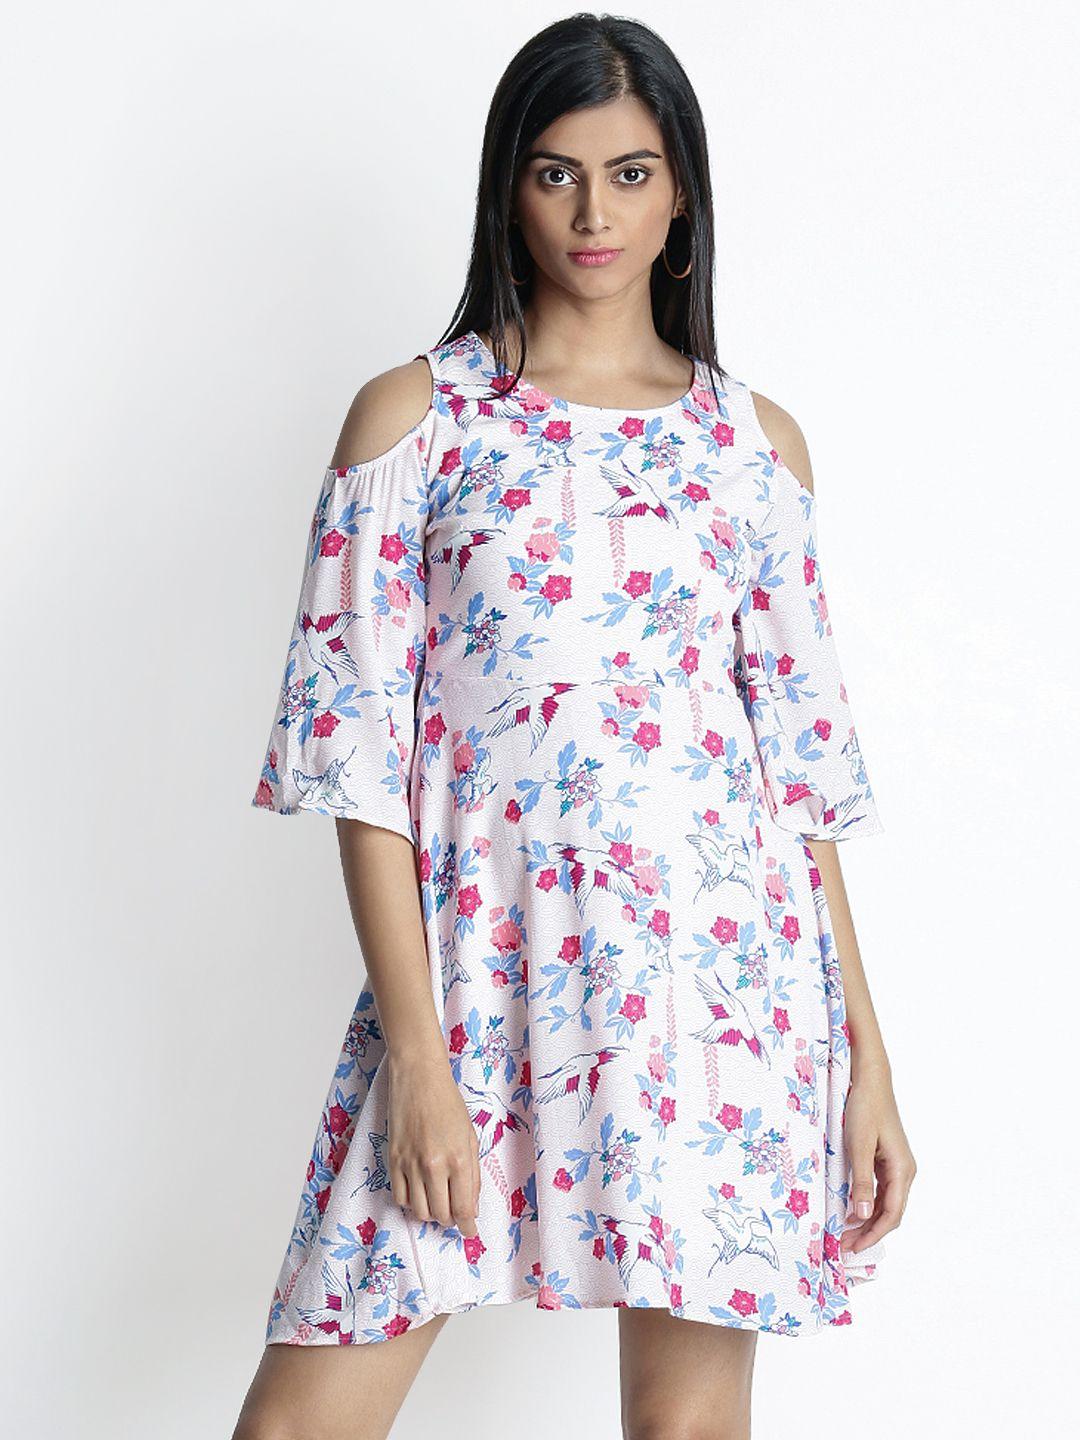 honey by pantaloons women off-white & pink floral printed fit and flare dress